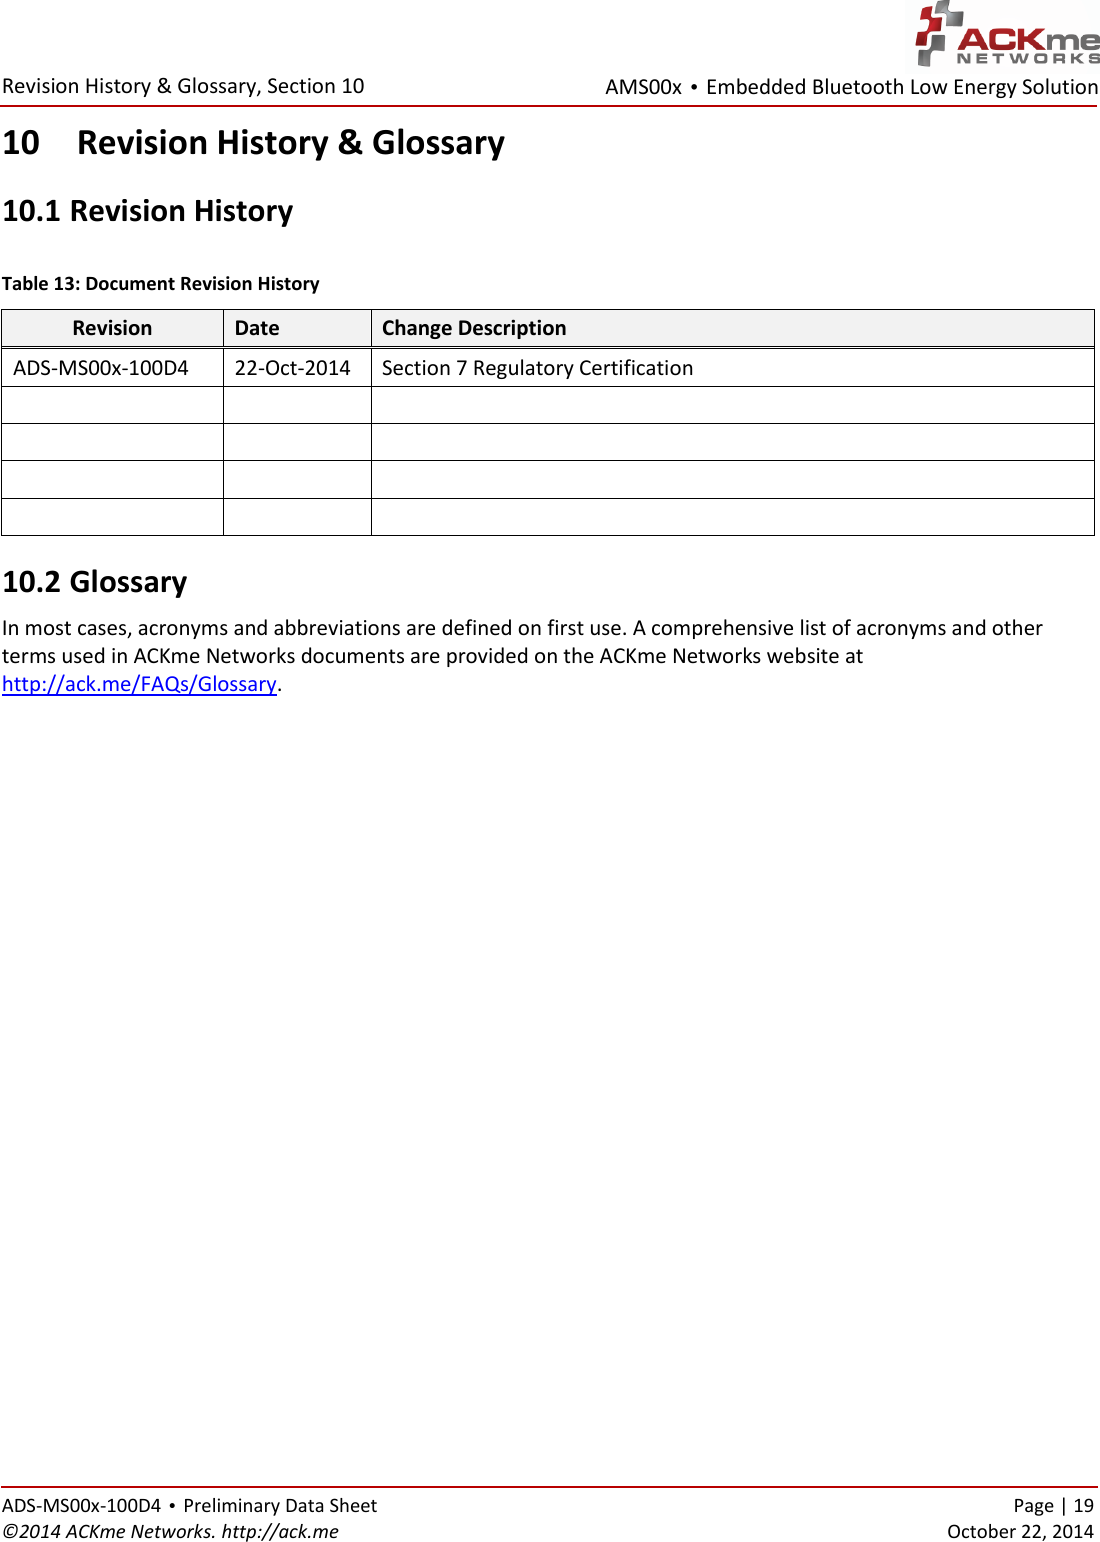 AMS00x • Embedded Bluetooth Low Energy Solution  Revision History &amp; Glossary, Section 10   ADS-MS00x-100D4 • Preliminary Data Sheet    Page | 19 ©2014 ACKme Networks. http://ack.me    October 22, 2014 10 Revision History &amp; Glossary 10.1  Revision History  Table 13: Document Revision History Revision Date Change Description ADS-MS00x-100D4 22-Oct-2014 Section 7 Regulatory Certification             10.2  Glossary In most cases, acronyms and abbreviations are defined on first use. A comprehensive list of acronyms and other terms used in ACKme Networks documents are provided on the ACKme Networks website at http://ack.me/FAQs/Glossary.                